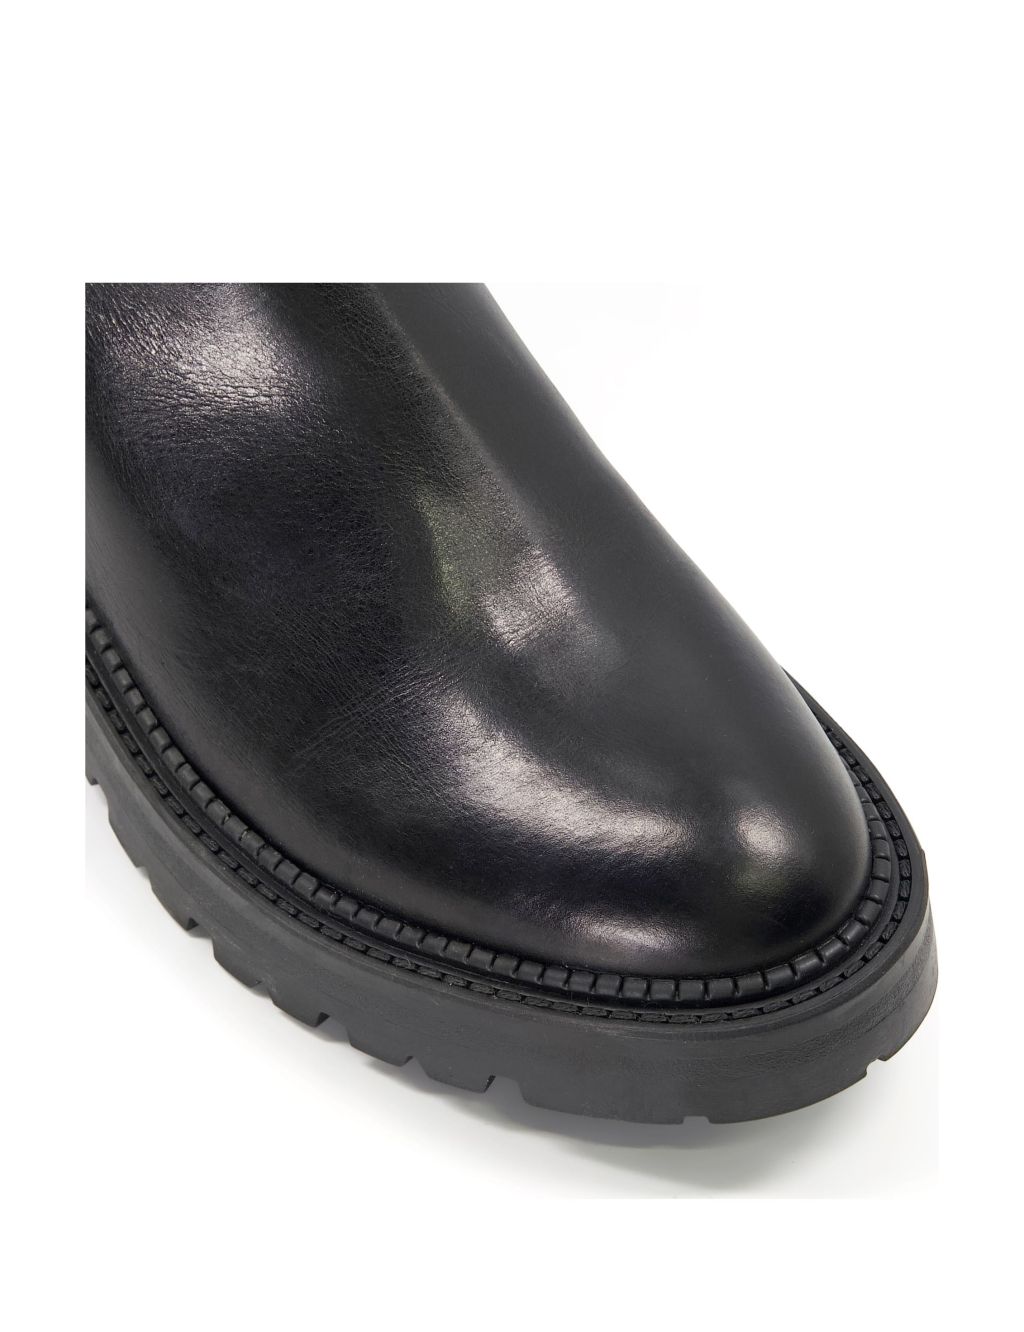 Leather Chunky Chelsea Ankle Boot image 2